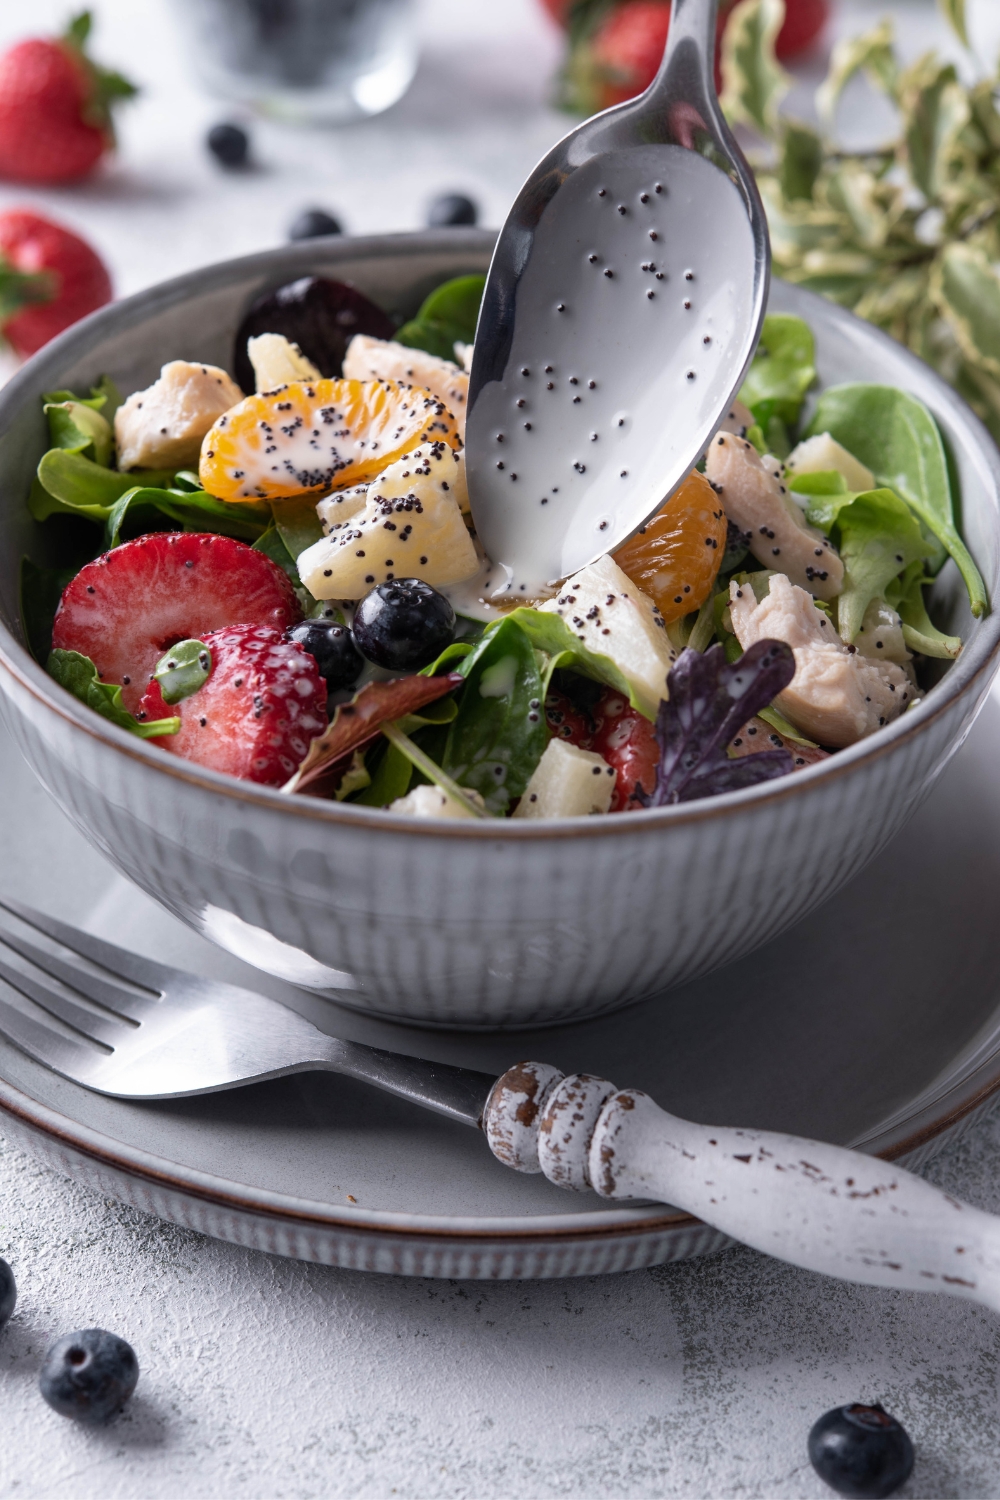 A bowl and saucer serving pair with strawberry poppyseed salad in it. A spoon is drizzling poppyseed dressing on it.